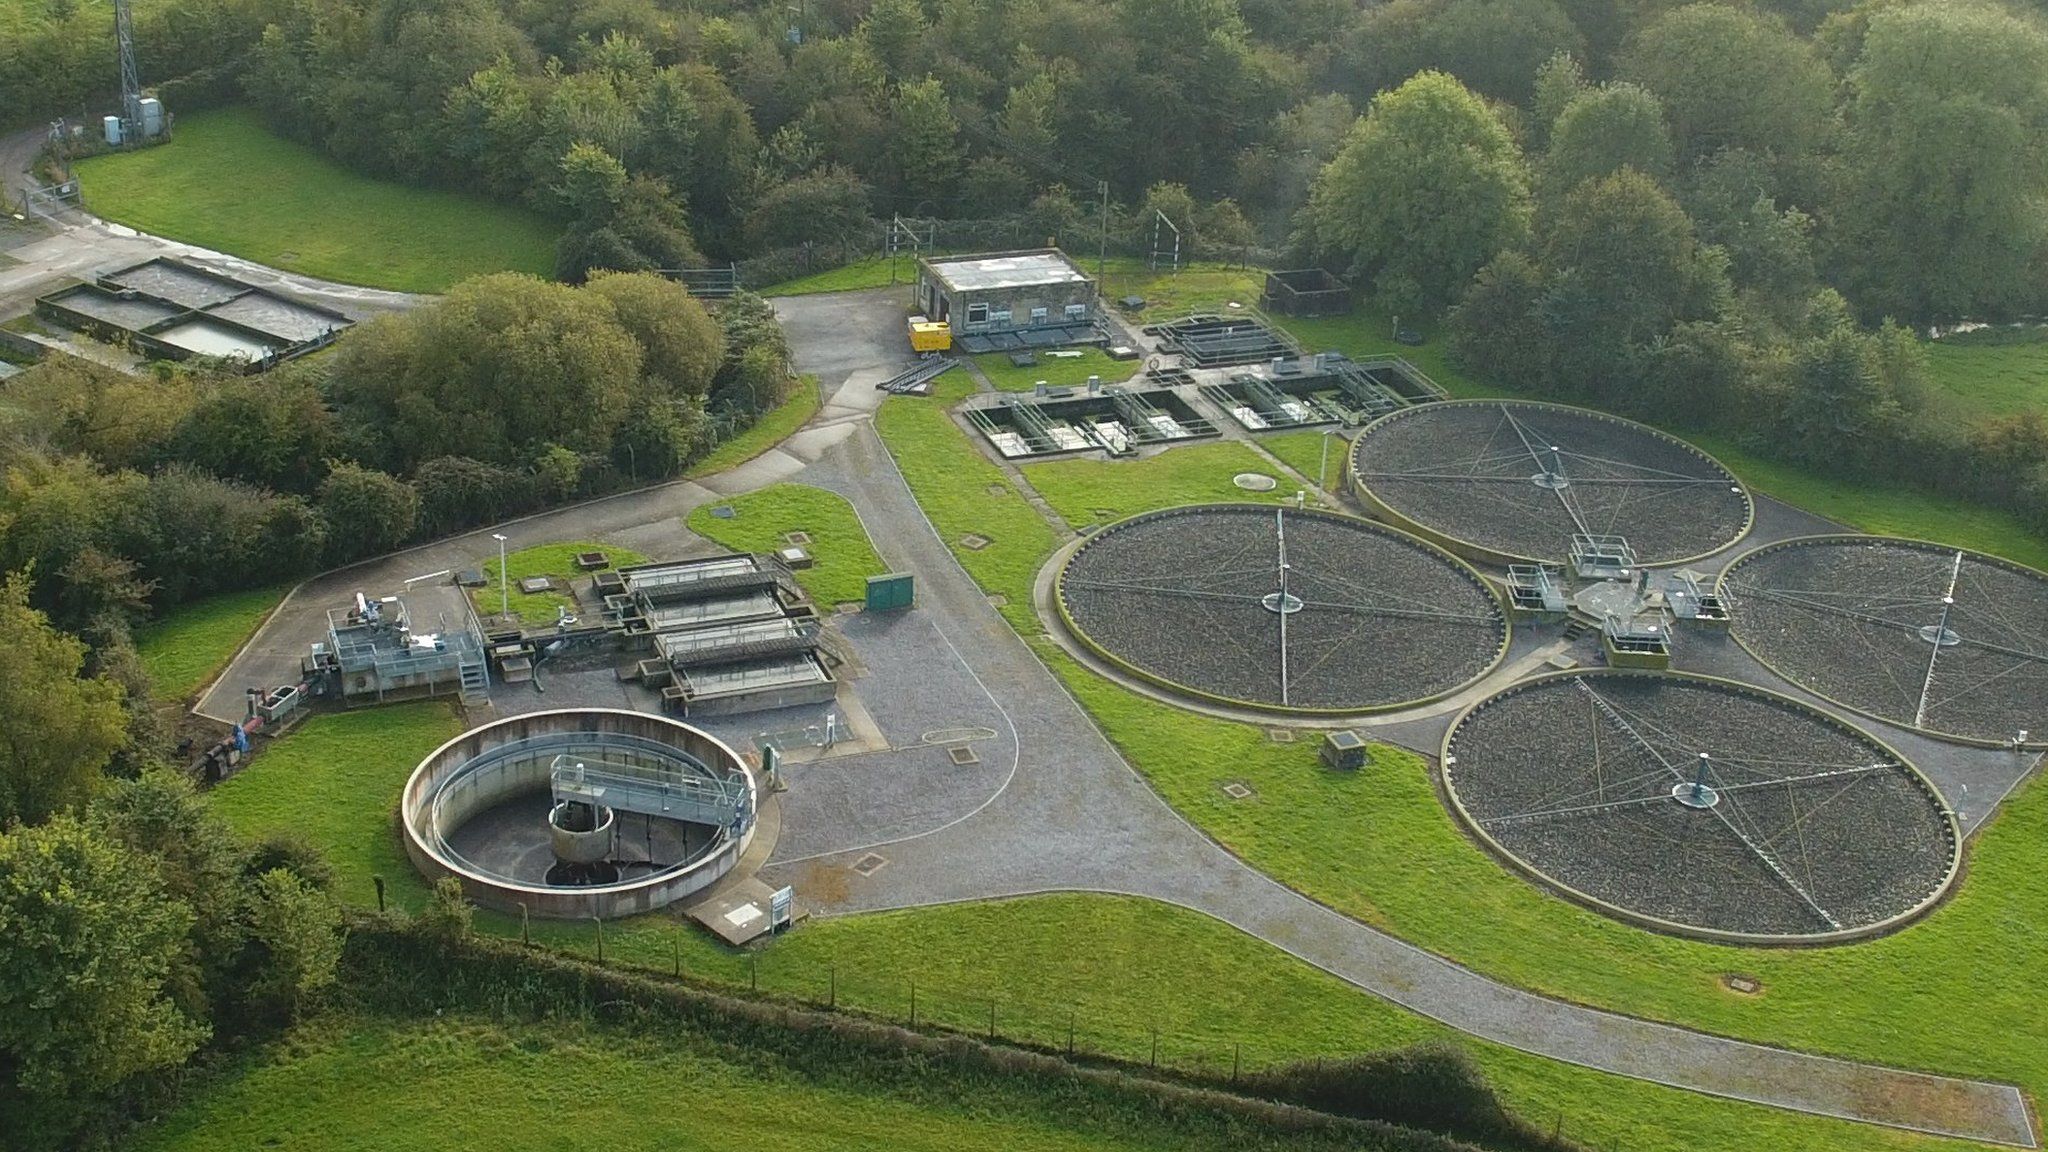 More than £3m of improvements are being made to a Mere Water Recycling Centre in south Wiltshire